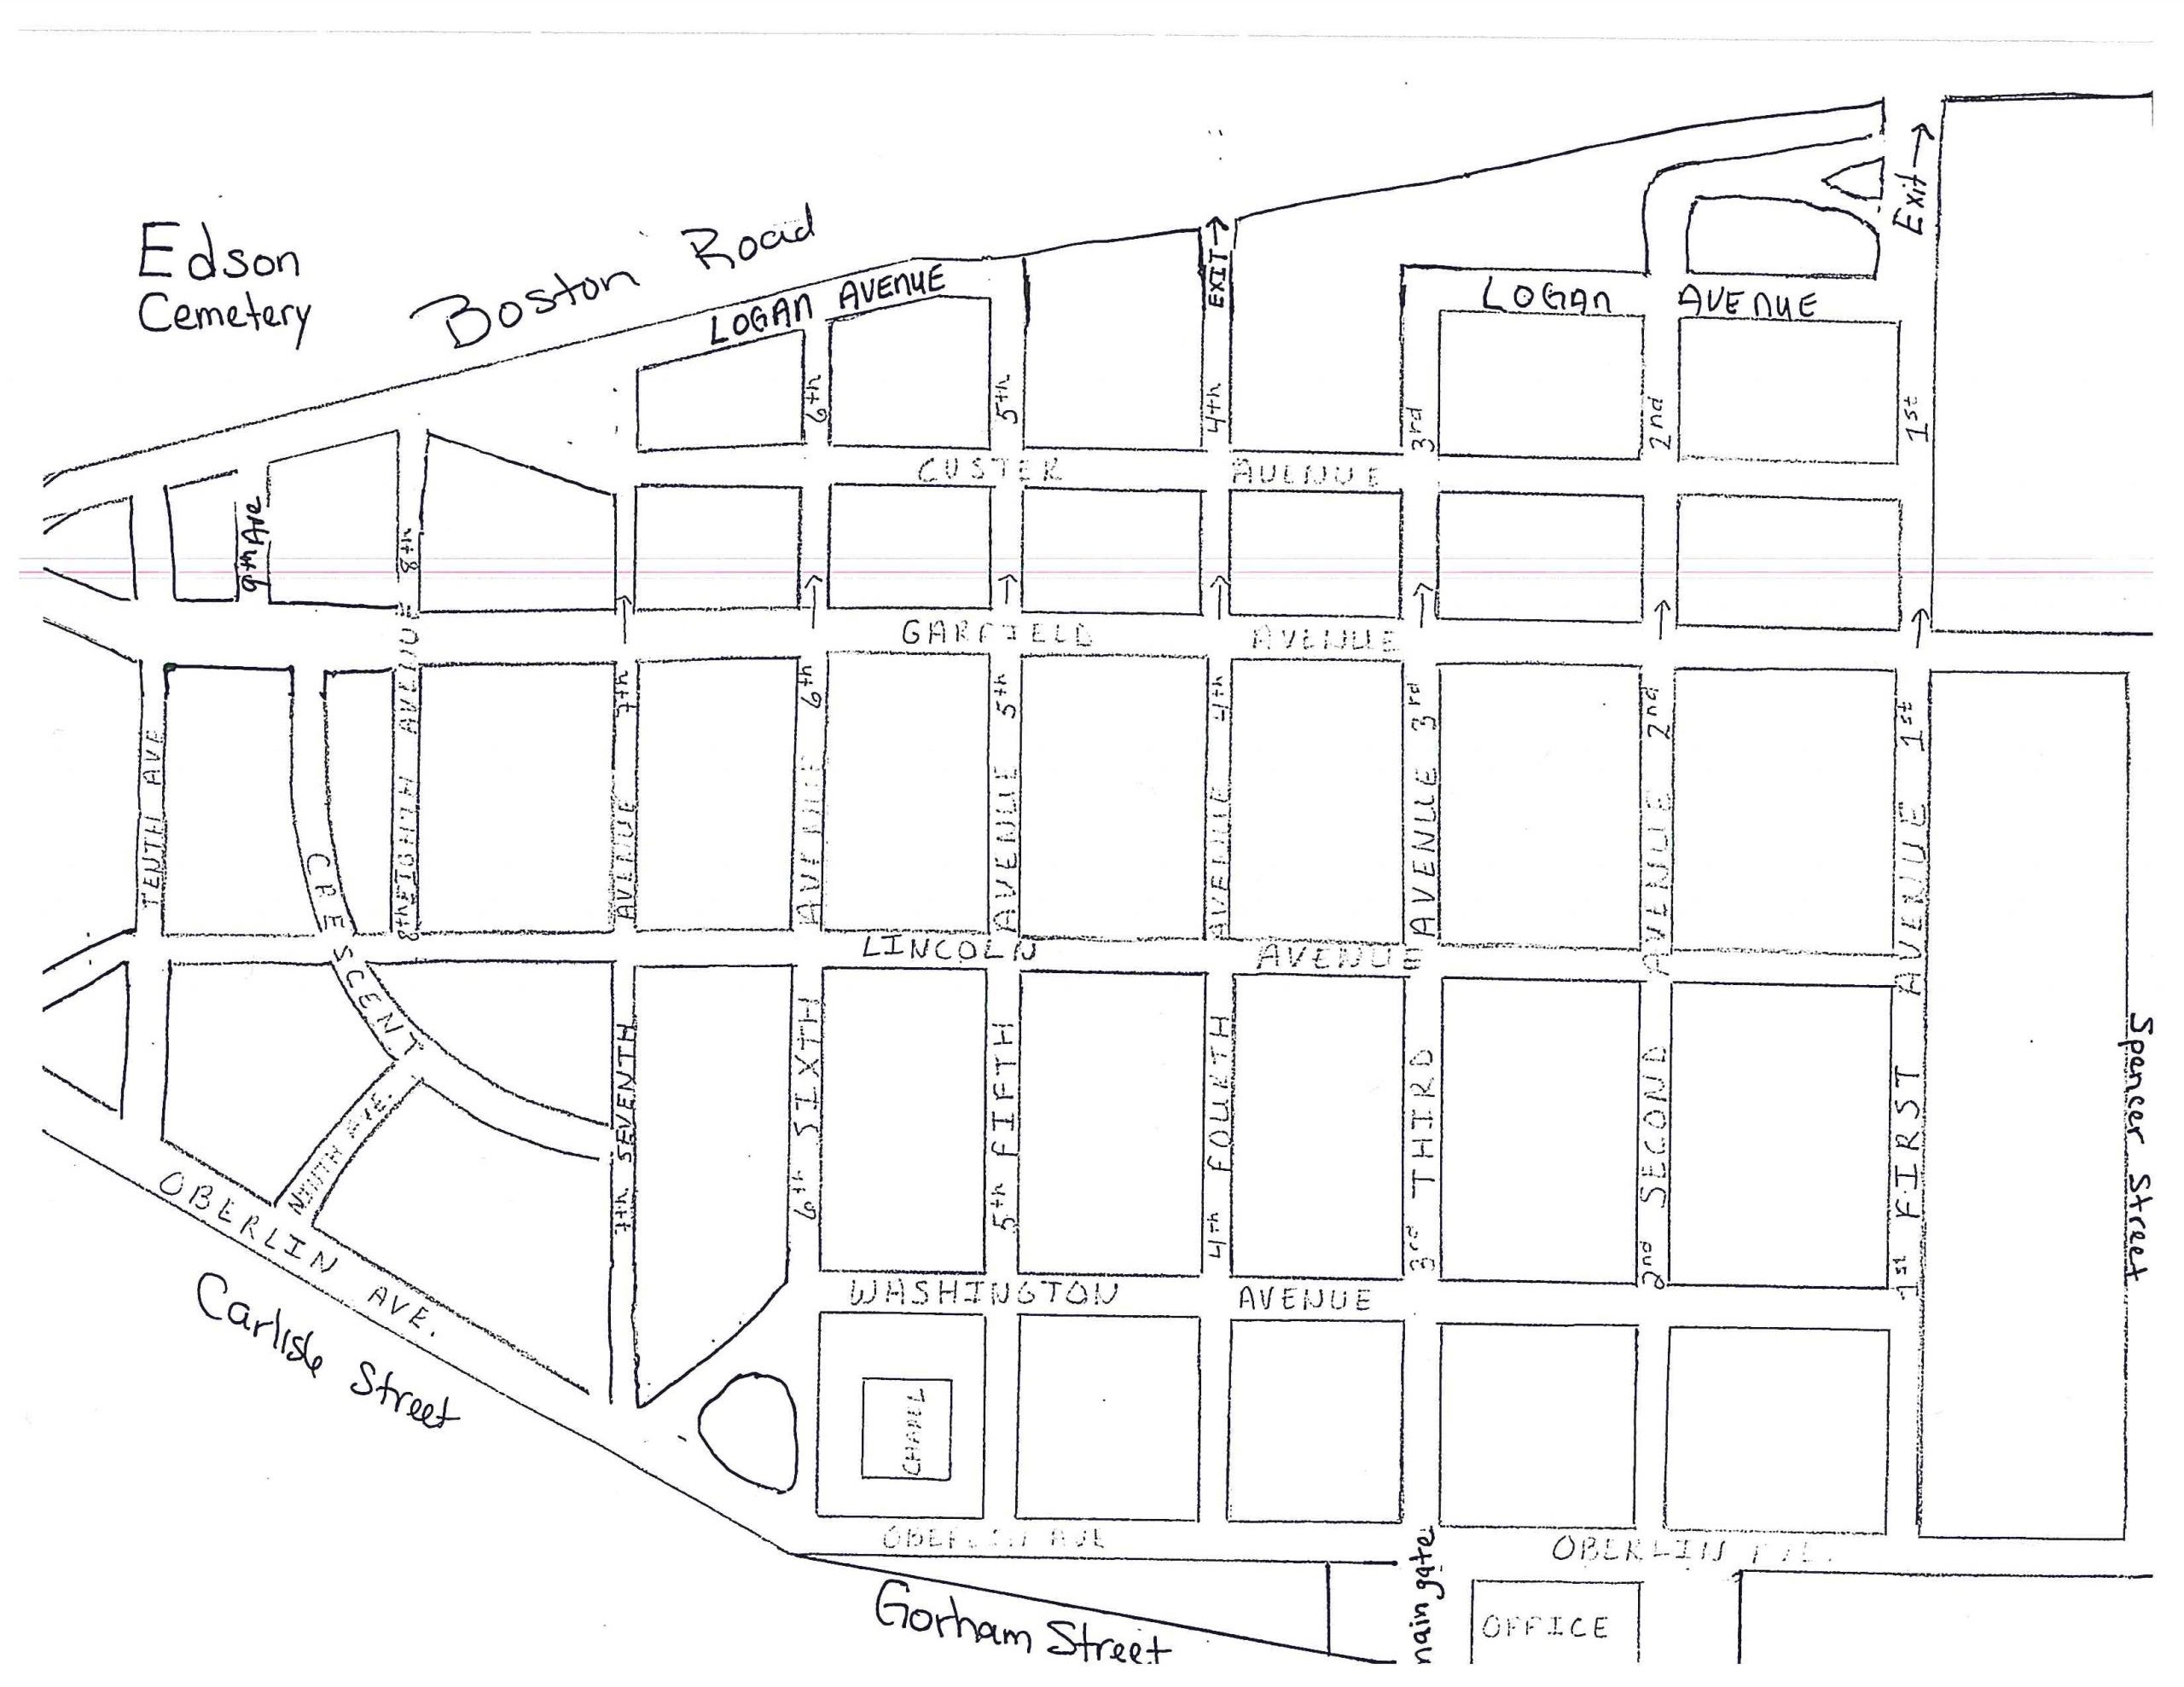 Cemetery map of Edson Cemetery in Lowell, Massachusetts